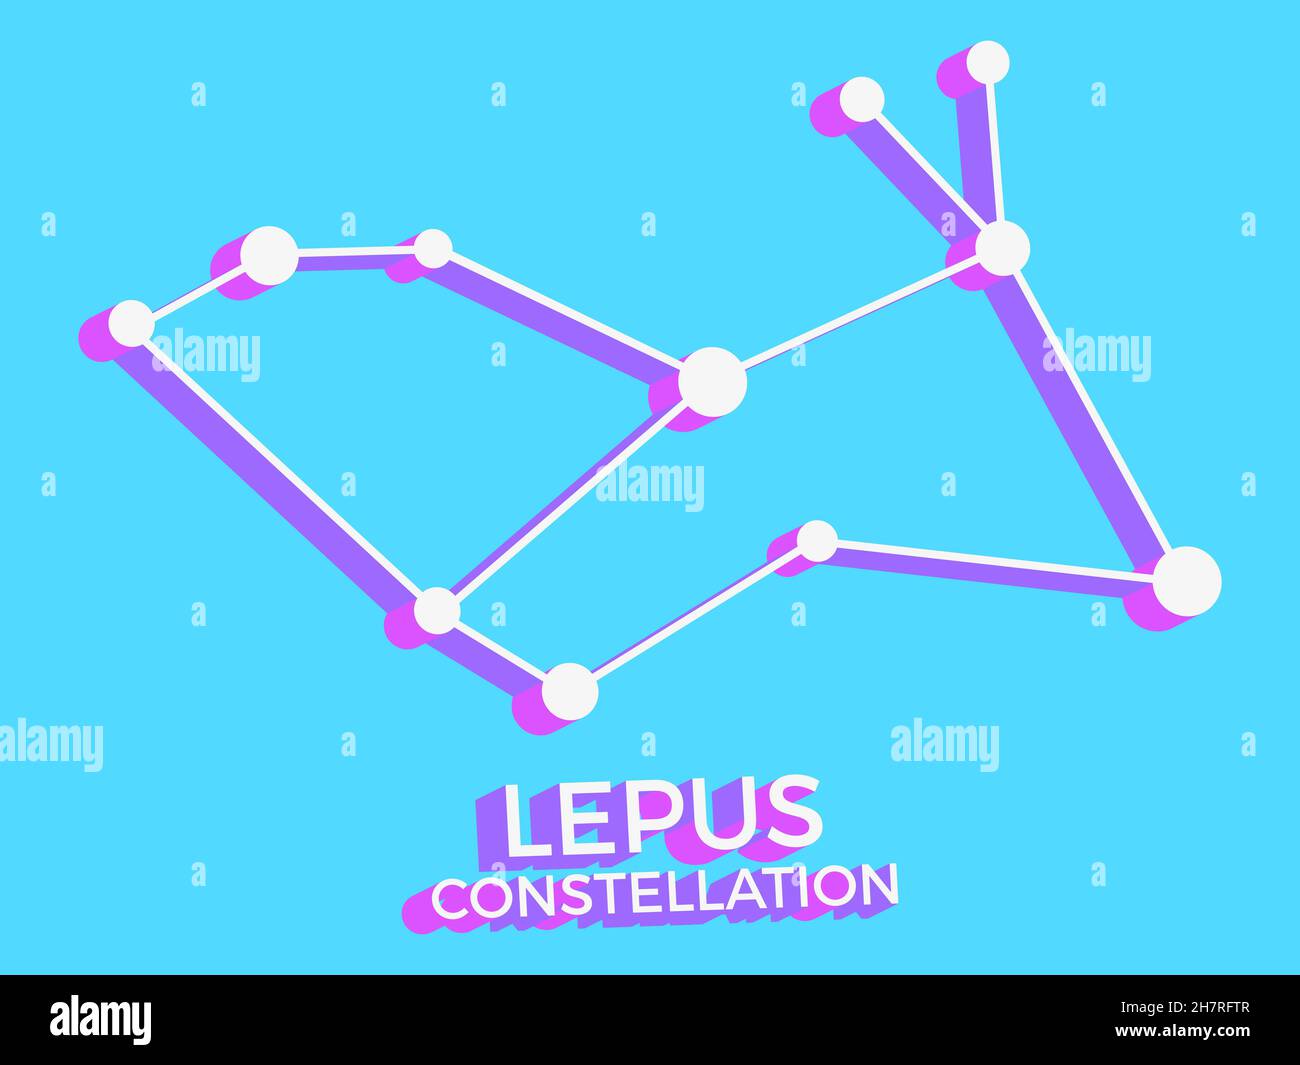 Lepus constellation 3d symbol. Constellation icon in isometric style on blue background. Cluster of stars and galaxies. Vector illustration Stock Vector